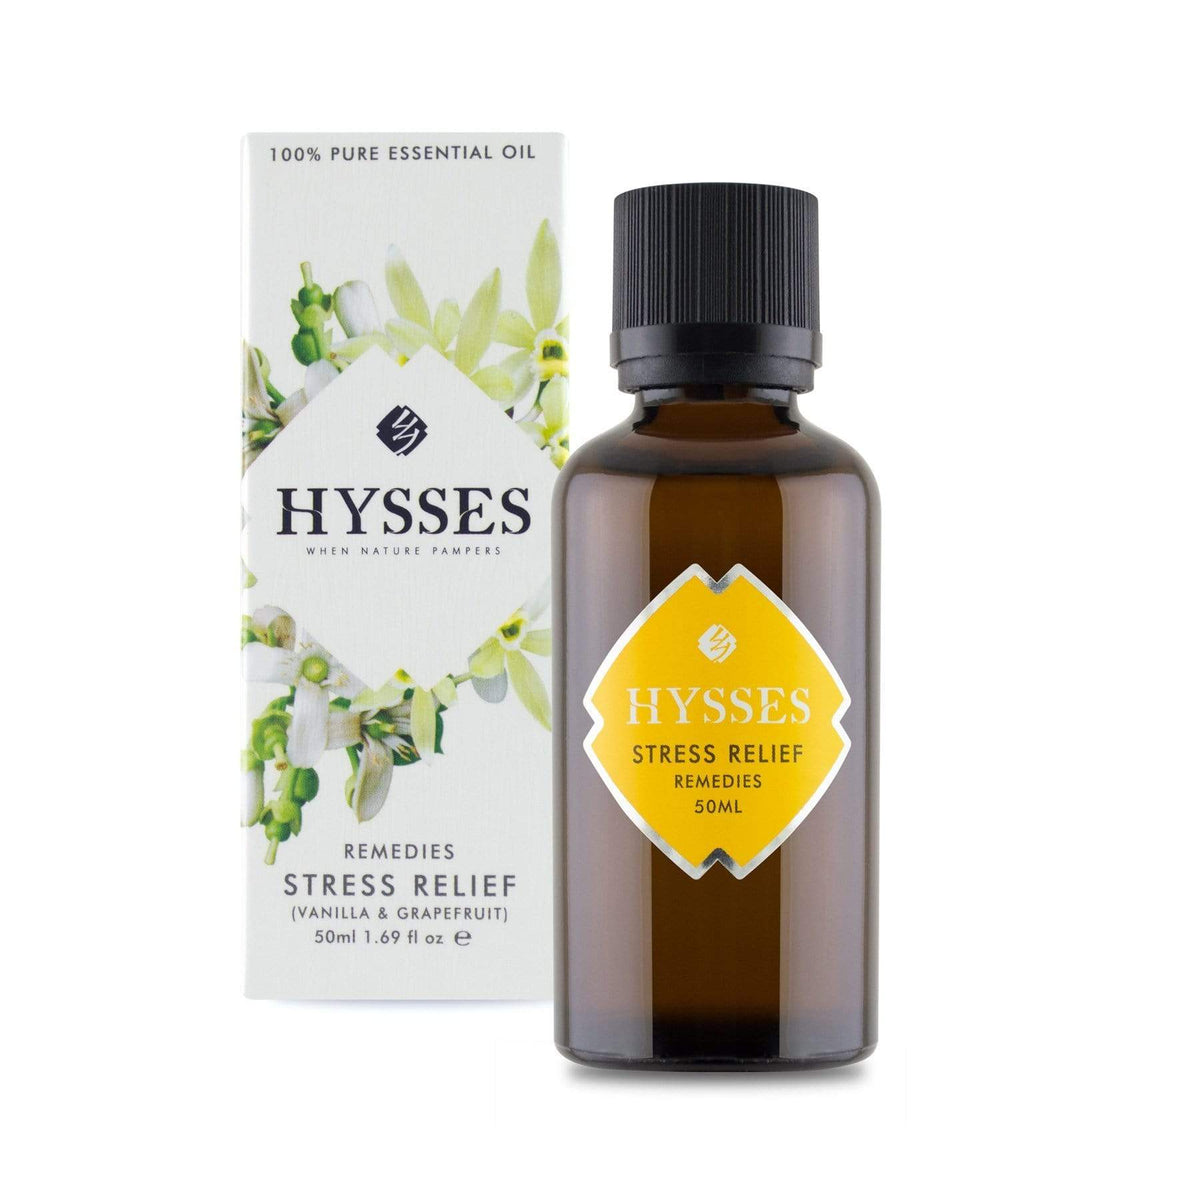 Hysses Essential Oil 50ml Remedies, Stress Relief